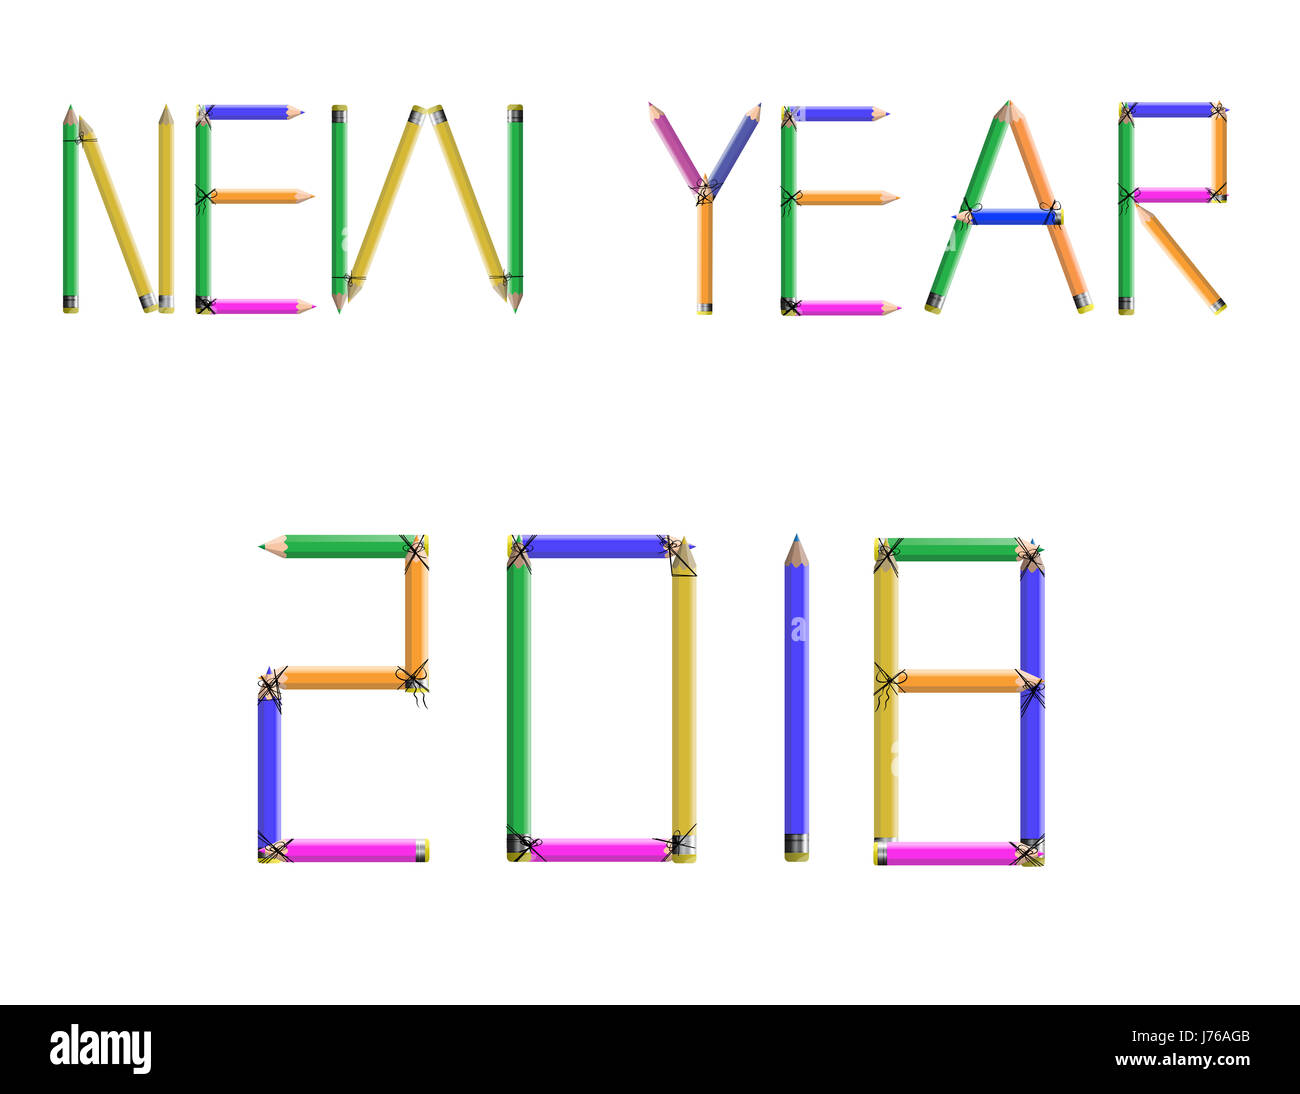 Colorful card for New Year 2018 with crayons Stock Photo